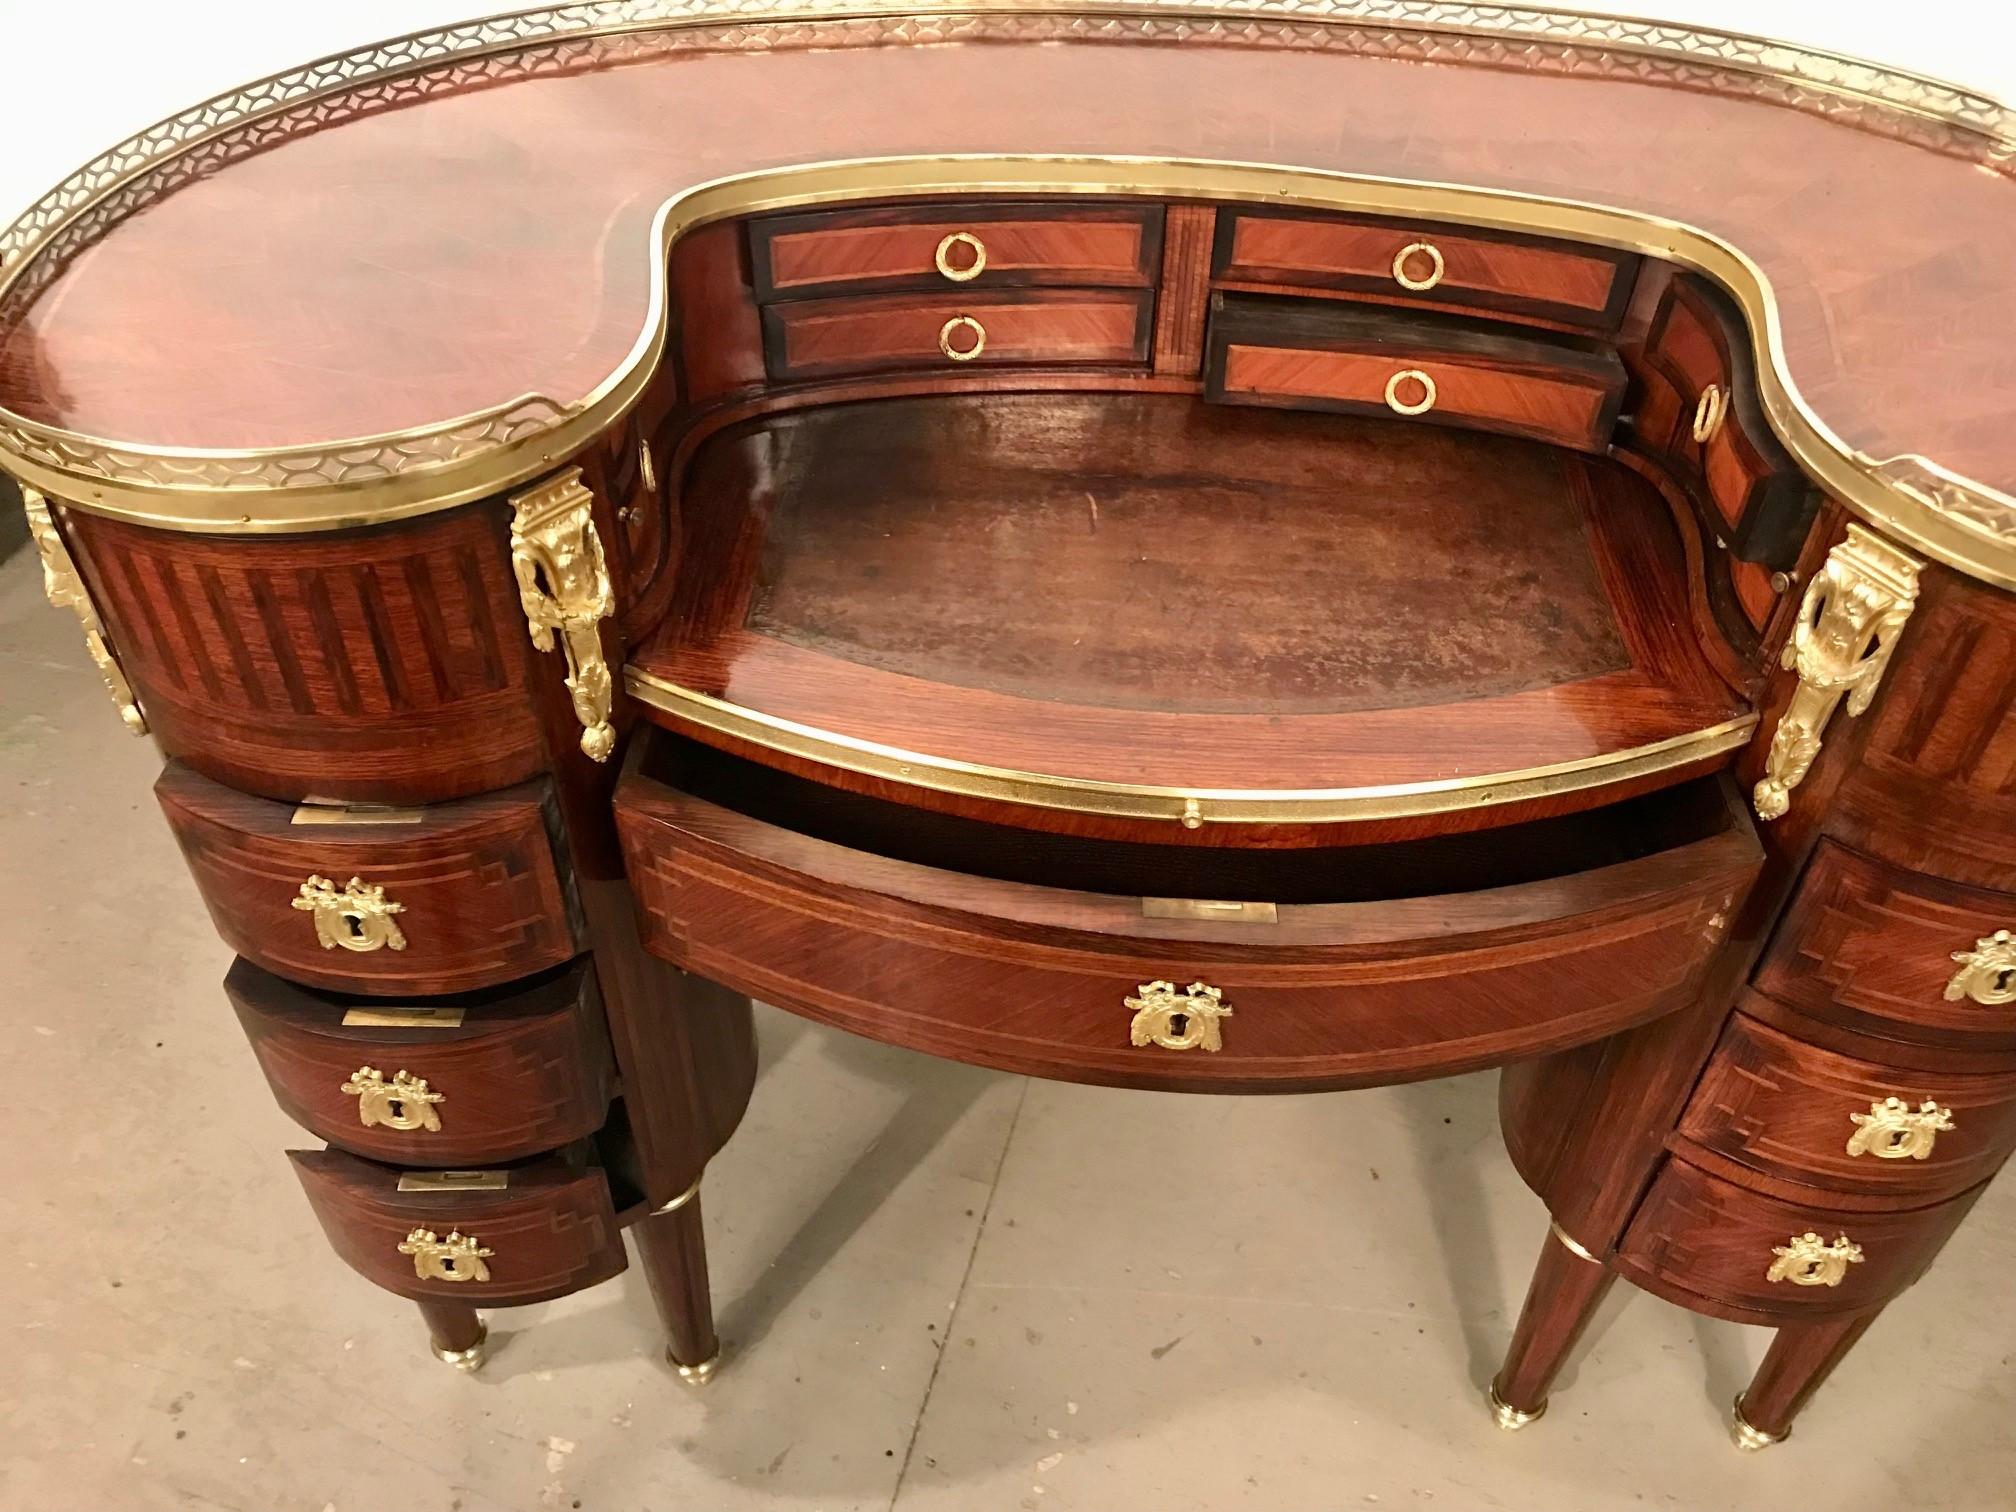 Antique French Louis XVI Style Mahogany and Parquetry Bureau a Rognon For Sale 15